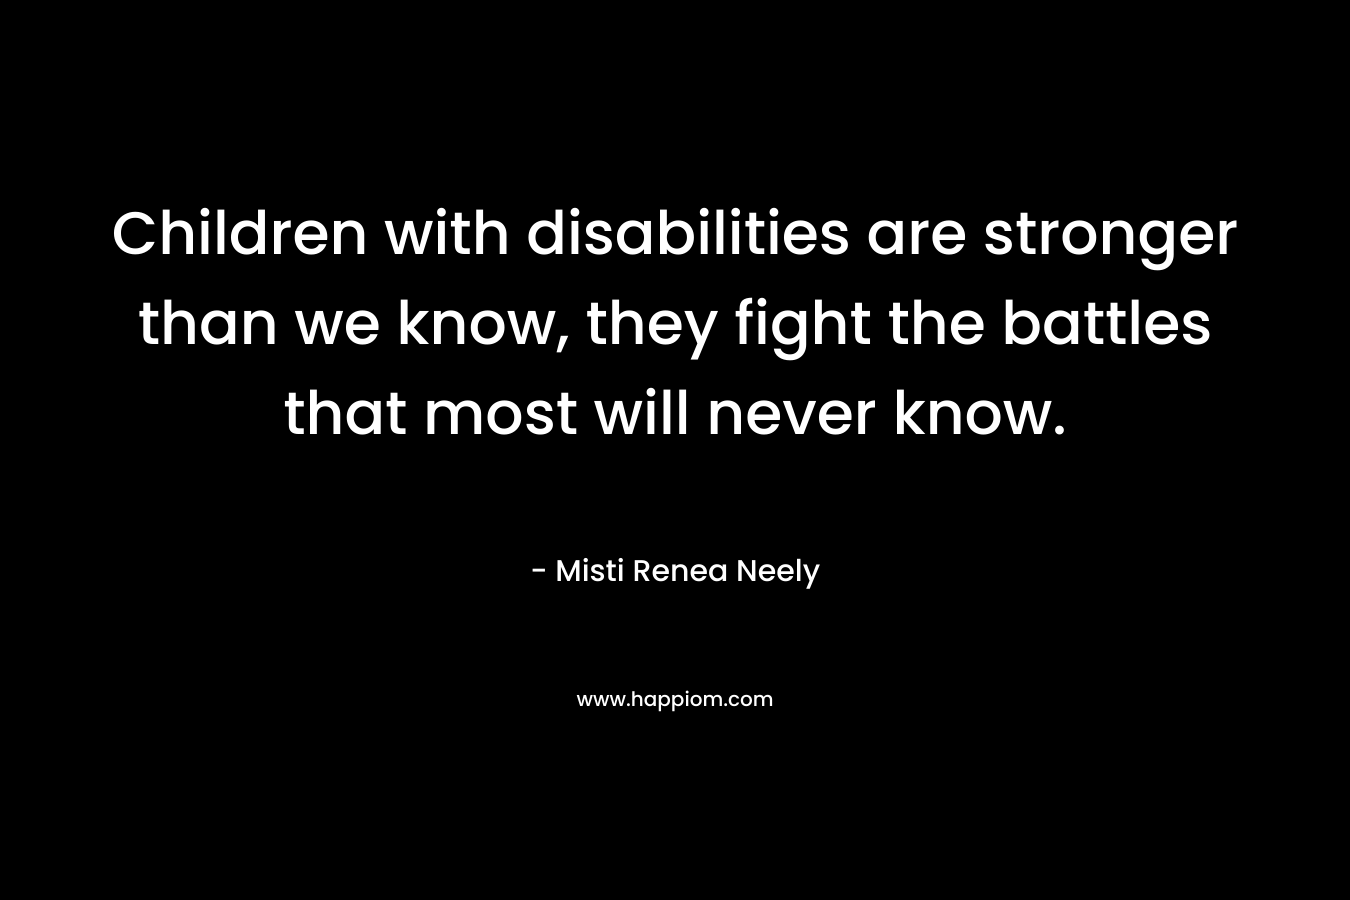 Children with disabilities are stronger than we know, they fight the battles that most will never know.